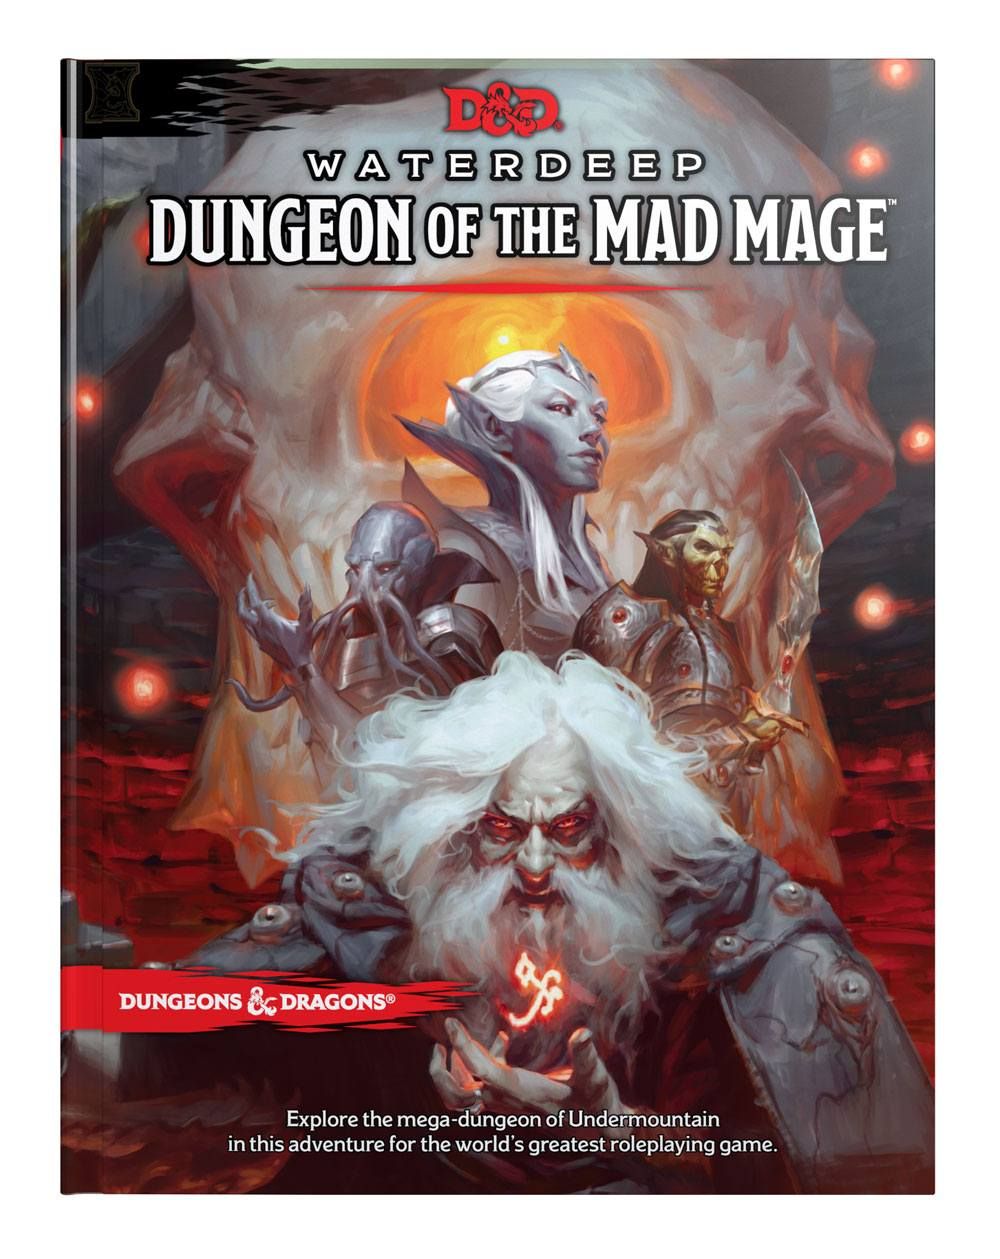 Dungeons & Dragons RPG Adventure Waterdeep: Dungeon of the Mad Mage Anglická Wizards of the Coast